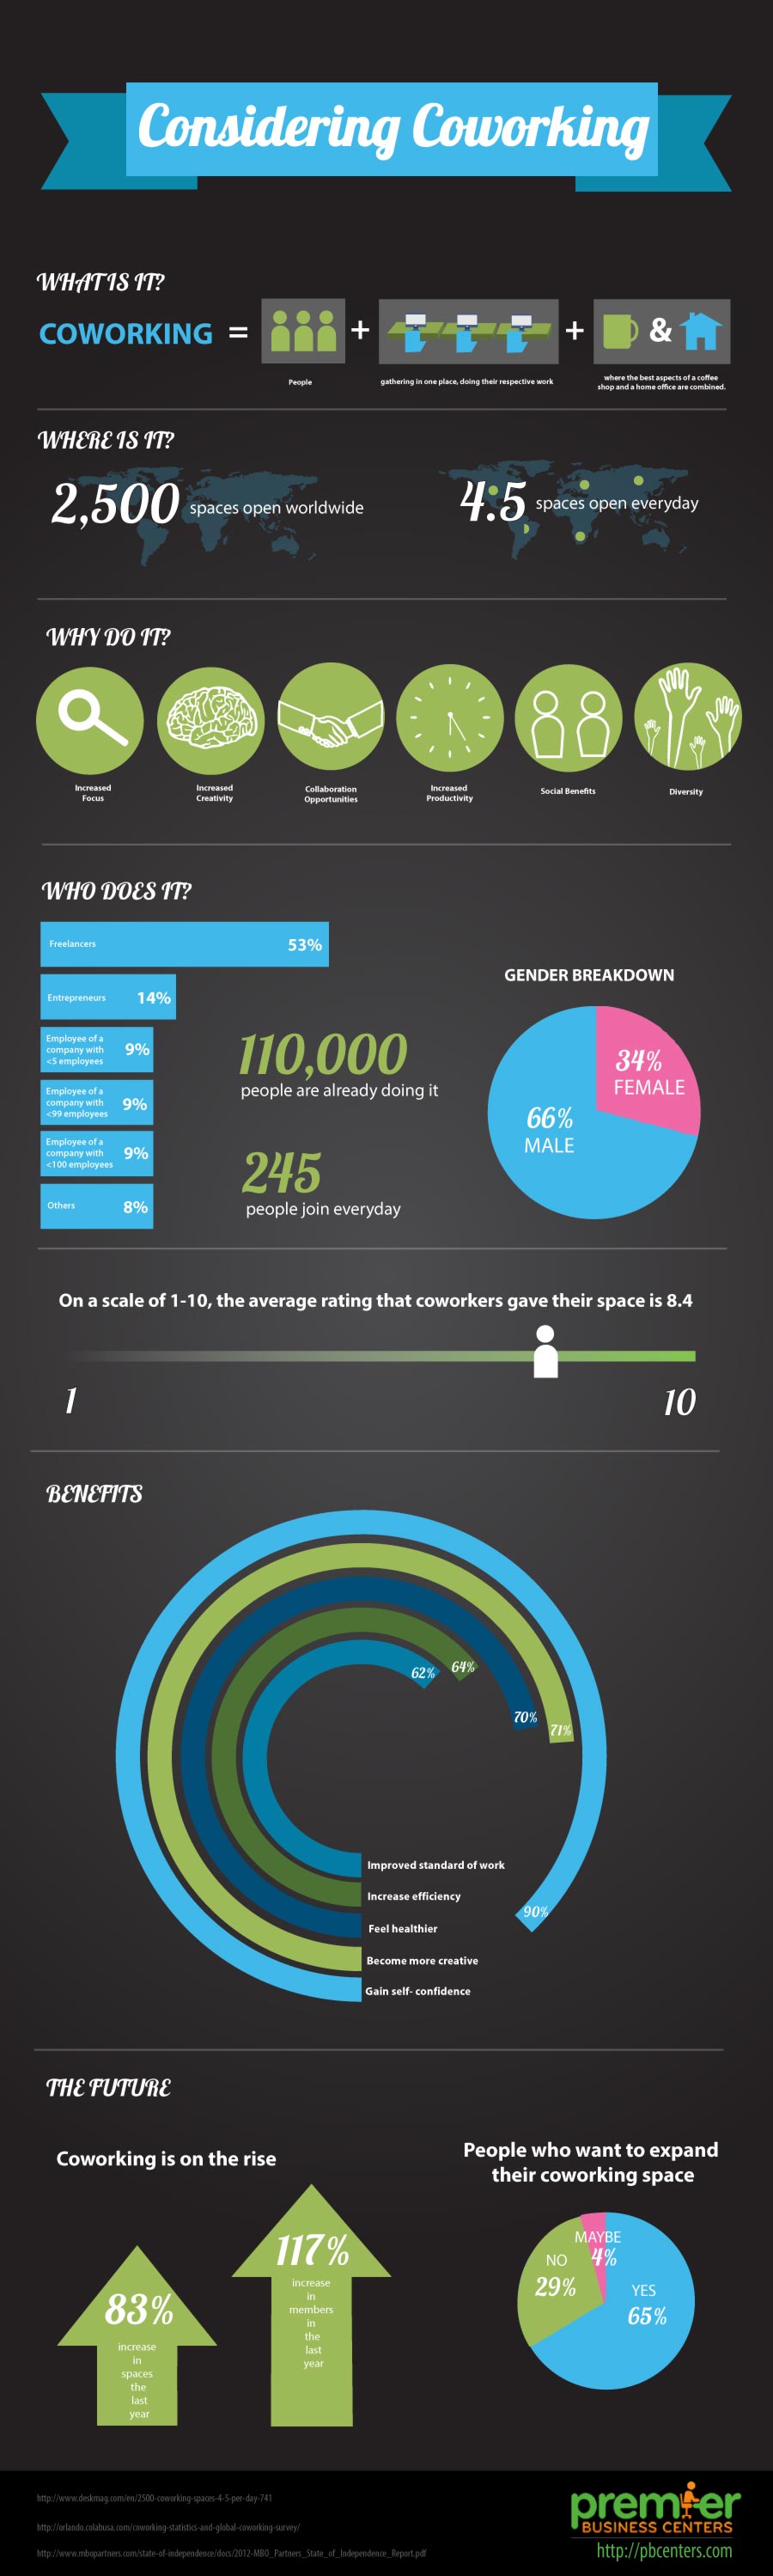 coworking infographic